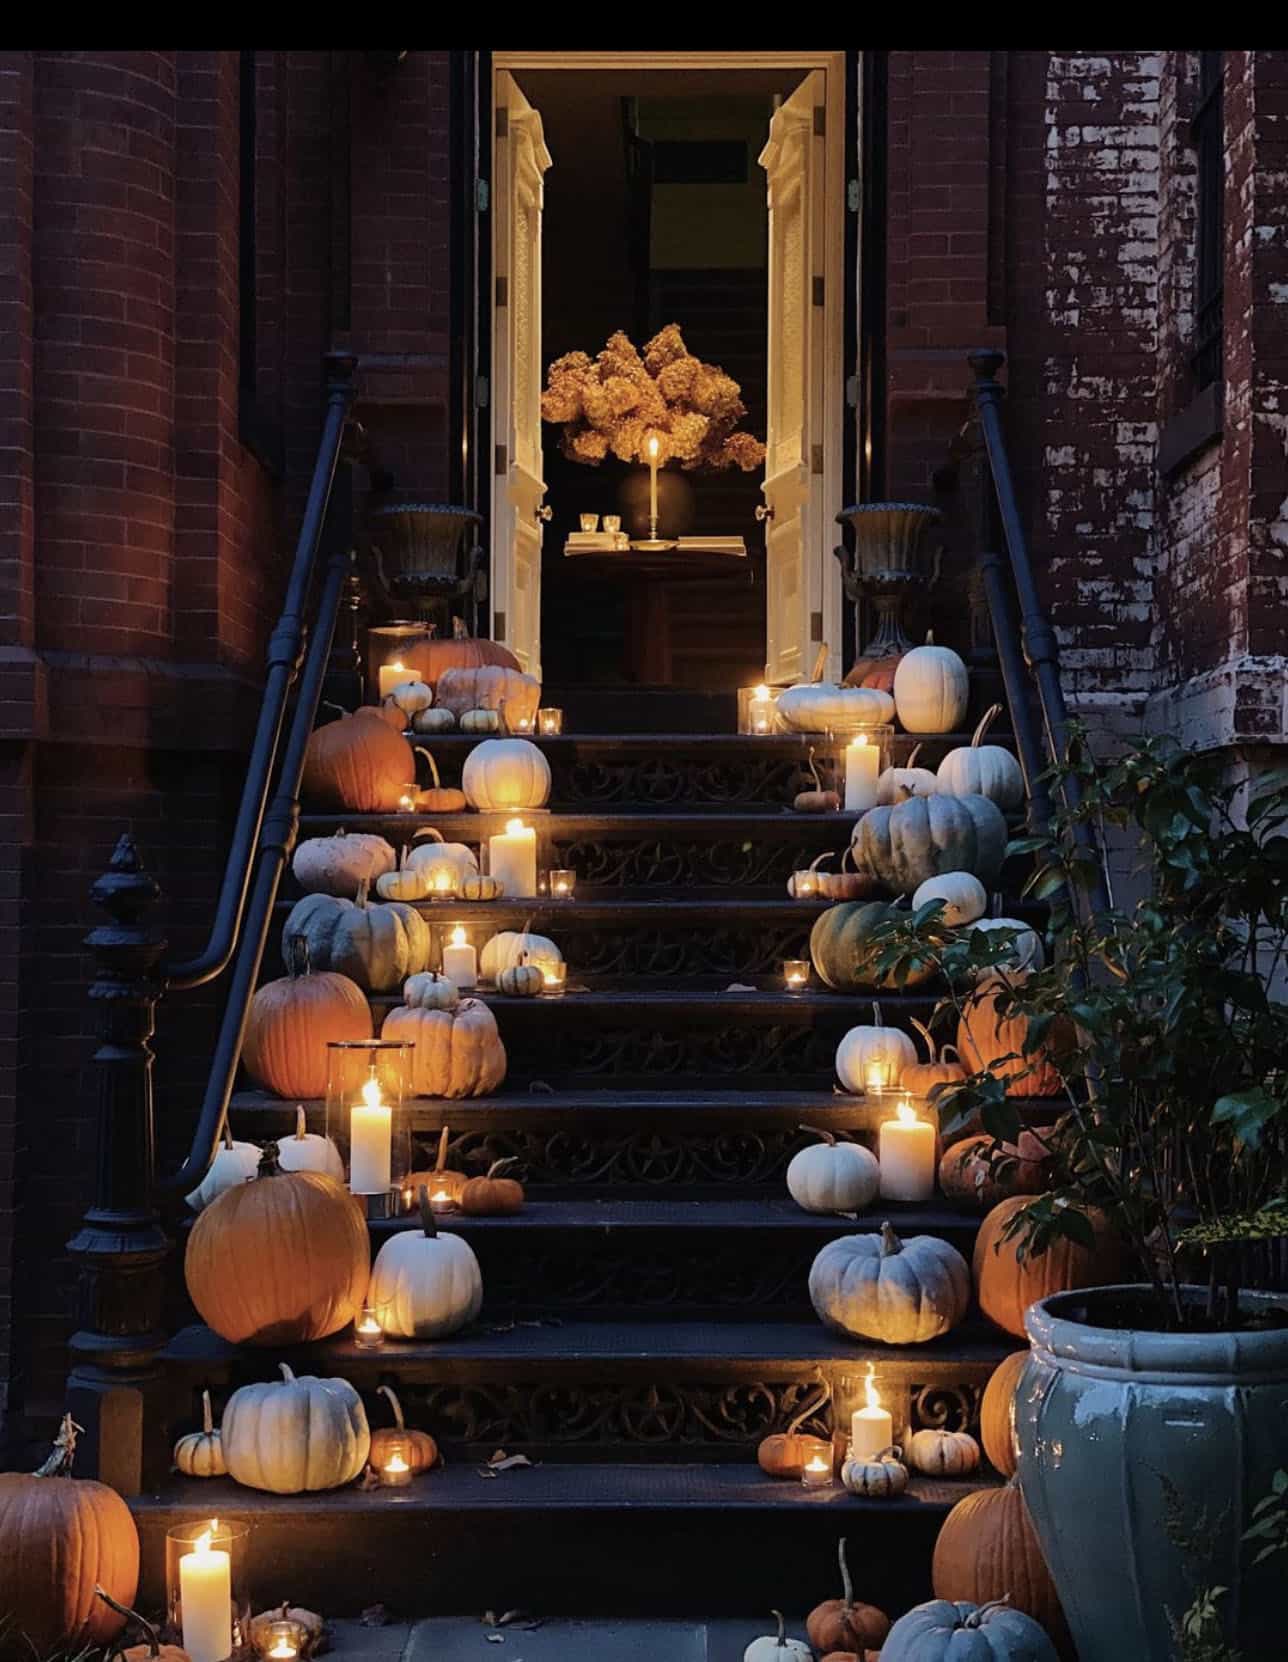 pumpkins-decorating-steps-leading-up-to-front-door-at-night-with-candles